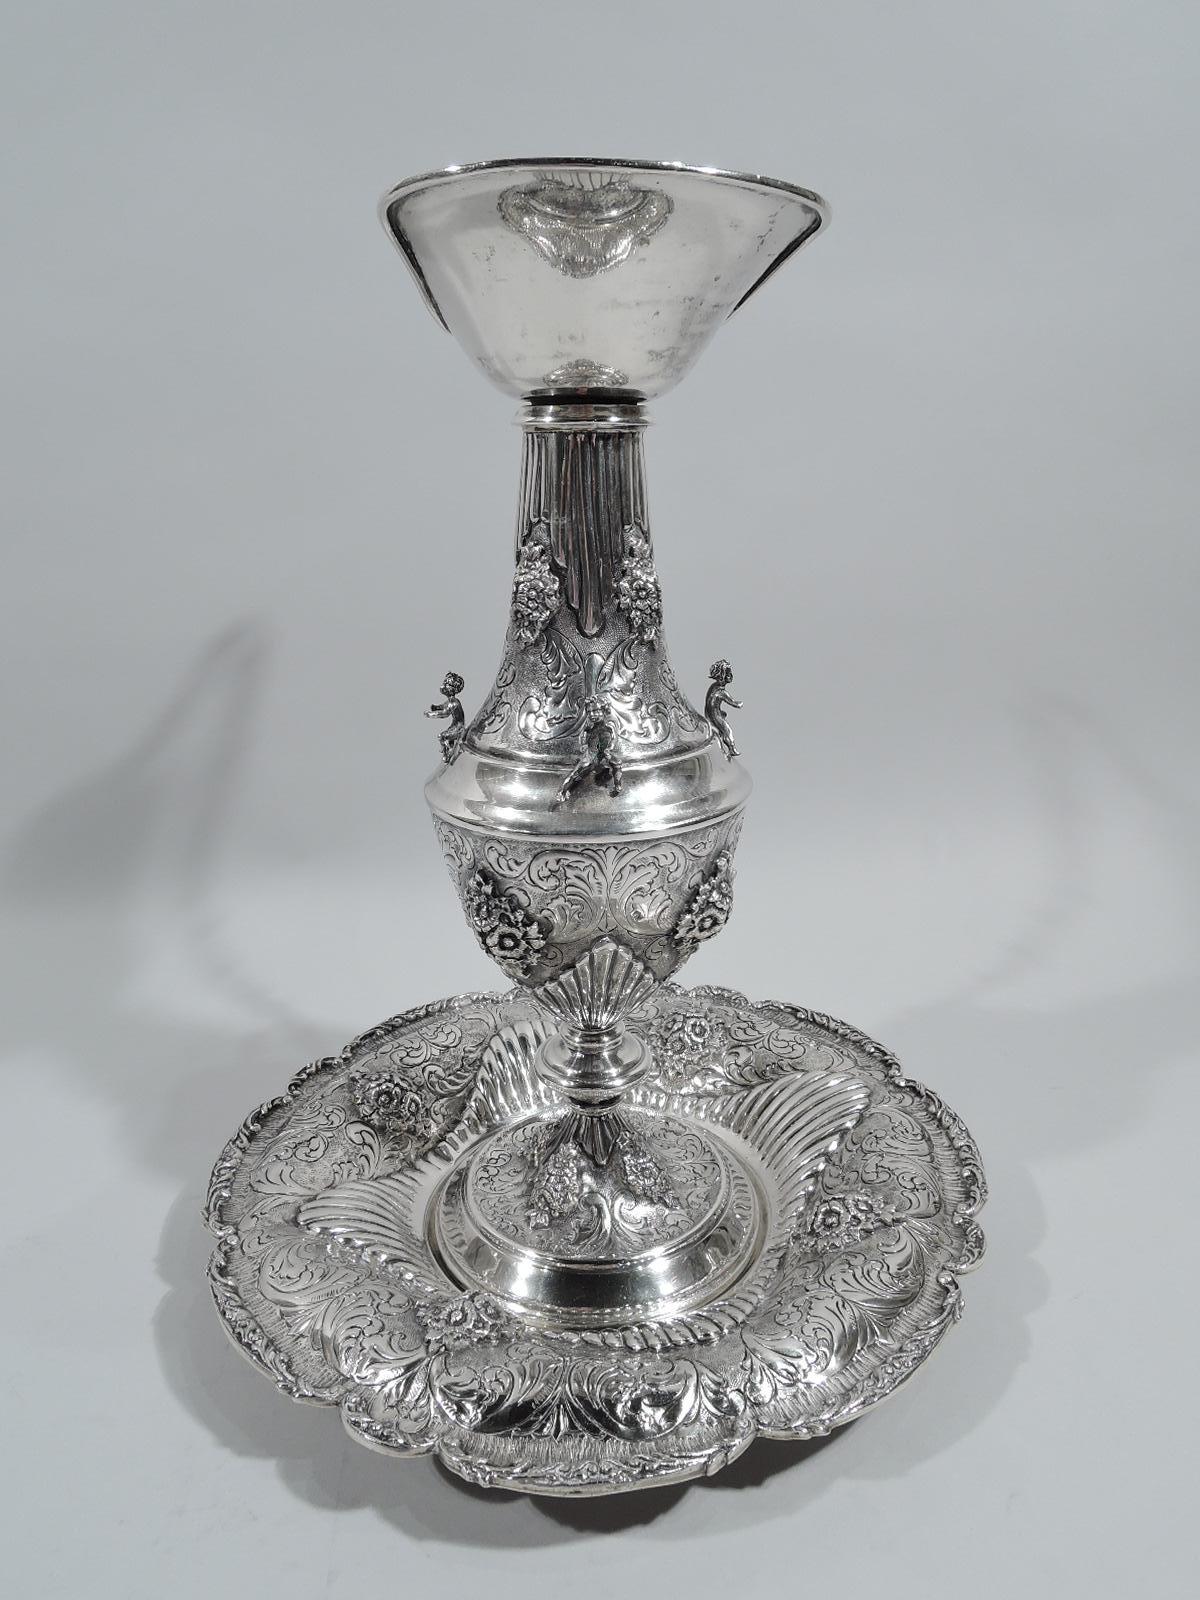 European Renaissance-style 800 silver wine ewer on stand. Ewer: Conical body, knopped support, raised foot with plain sides, upward tapering neck, and plain helmet mouth. Handle high-looping with scrolling leaves and animal-head mount. Stand: Plain